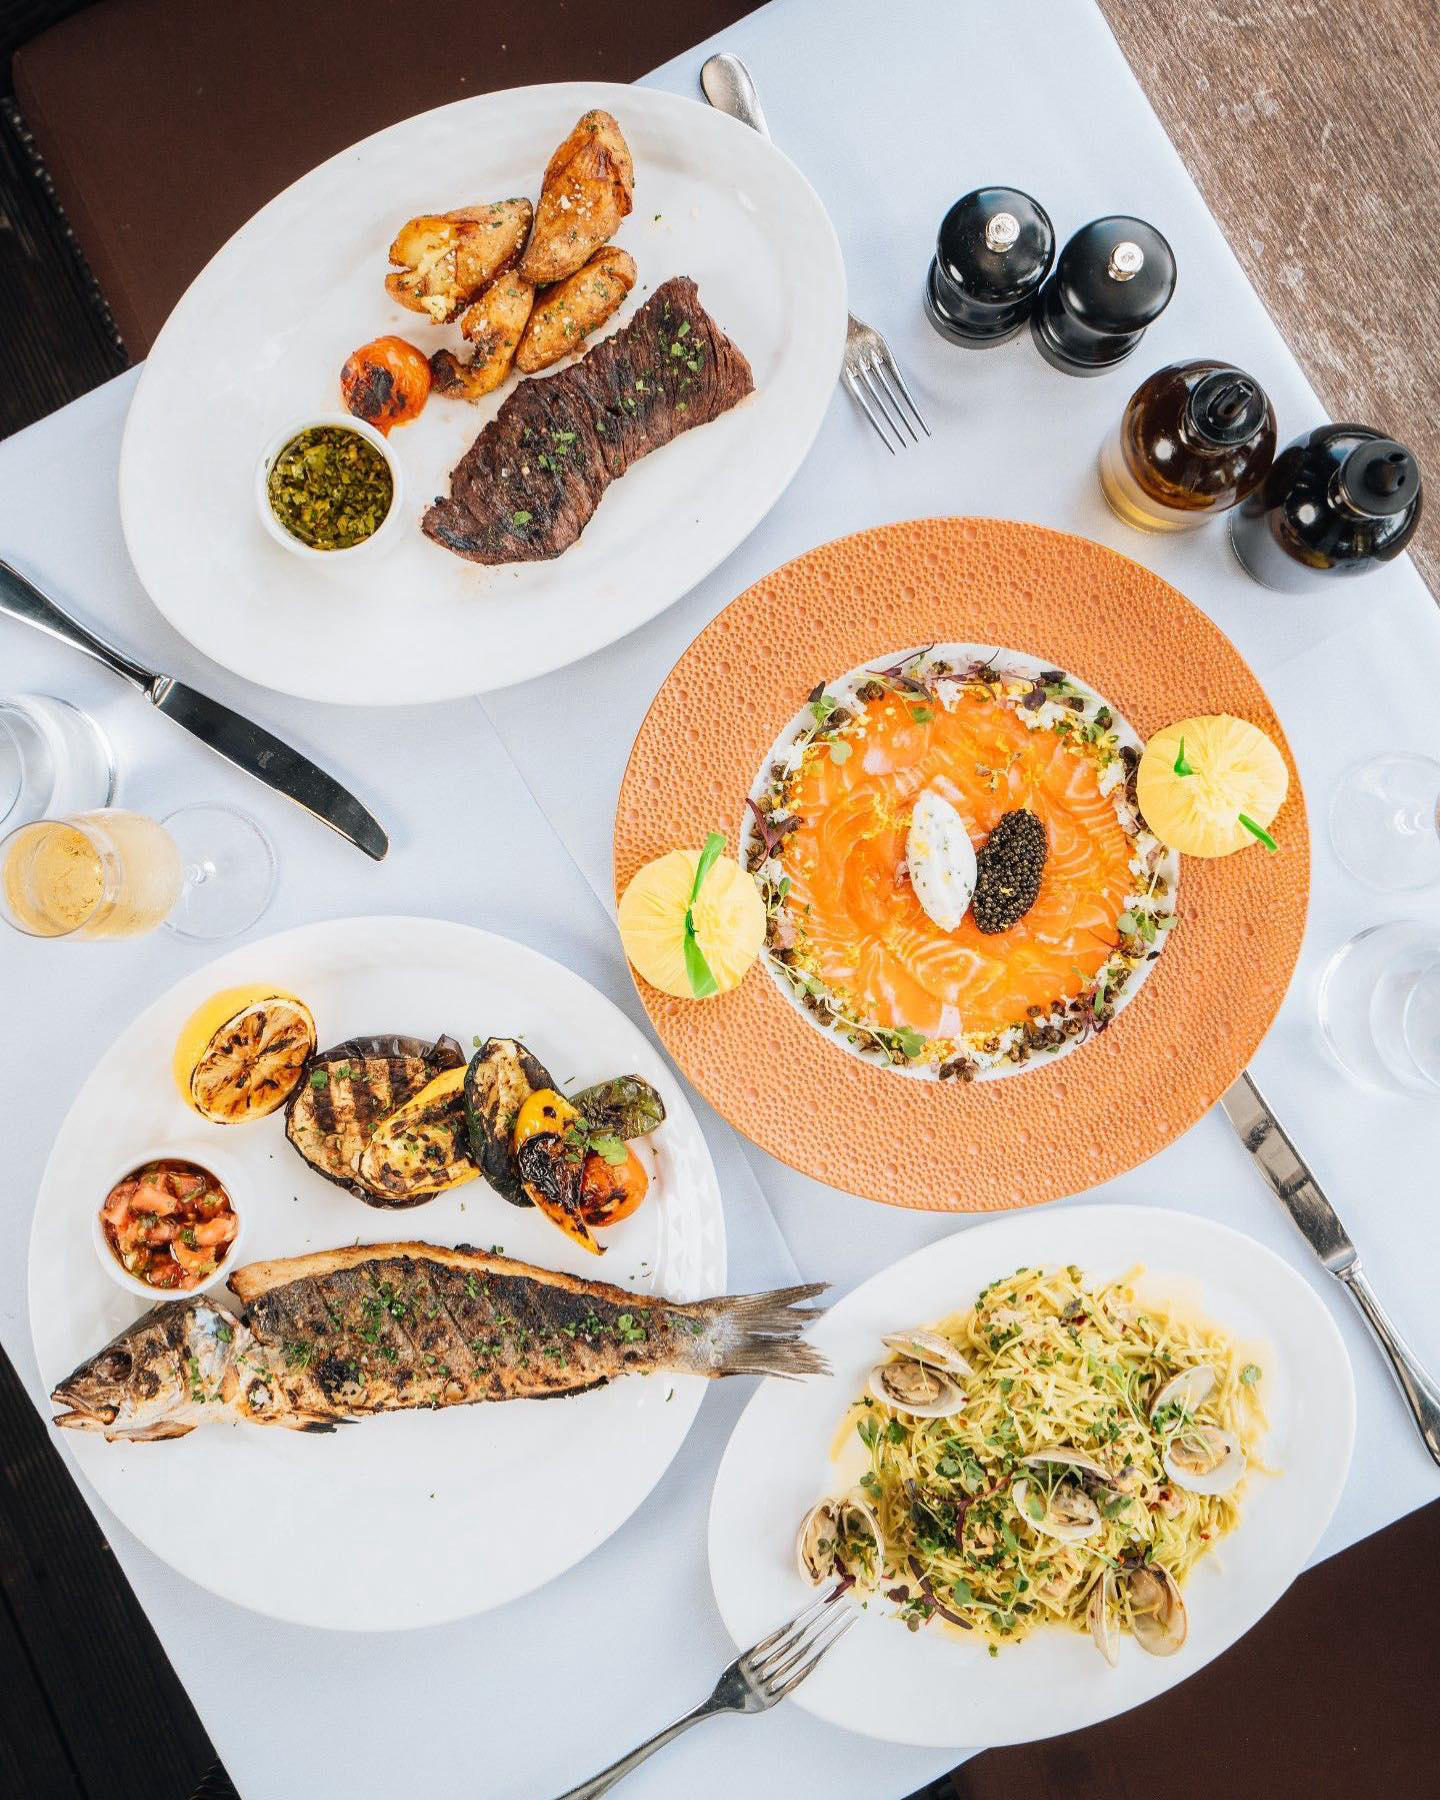 image  1 The Setai, Miami Beach - Dig into flavors of southern Europe, classic American dishes, and specialty